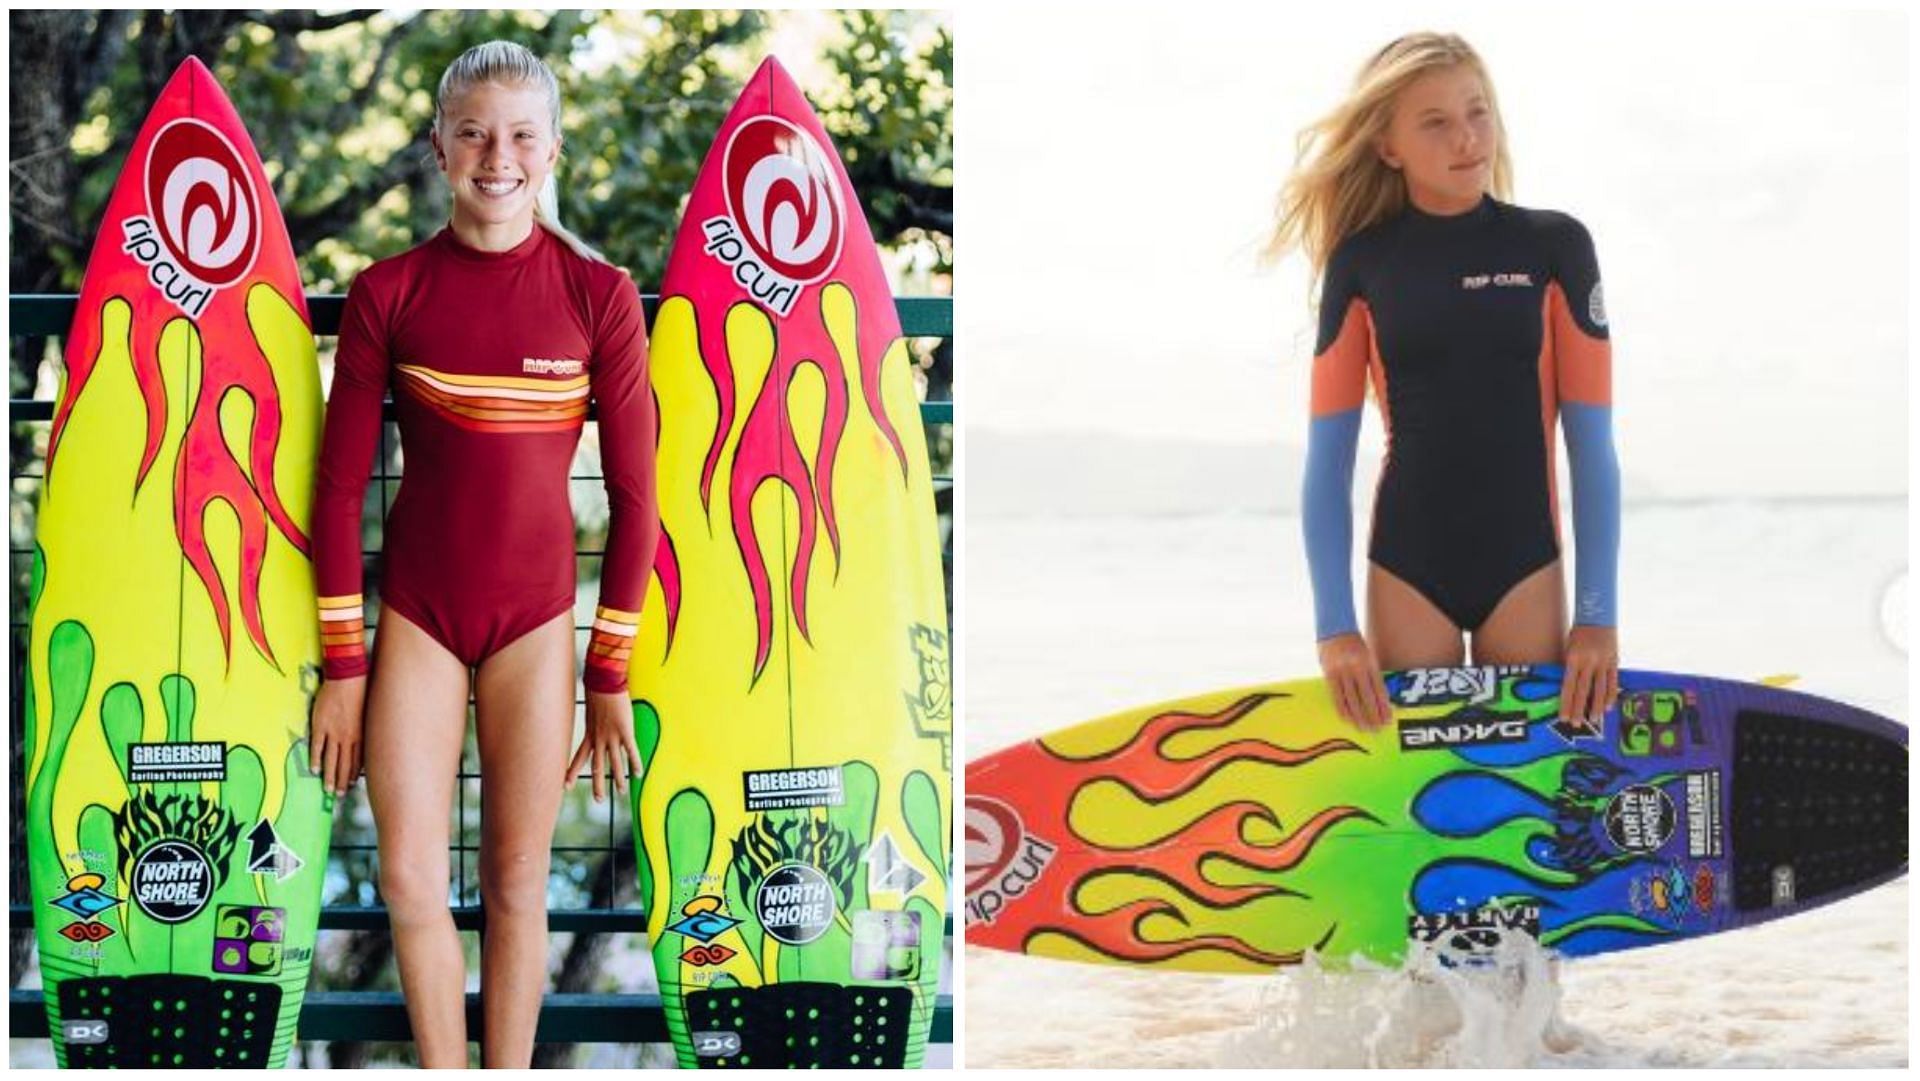 15-year-old Erin Brooks with her surfing board (via instagram)